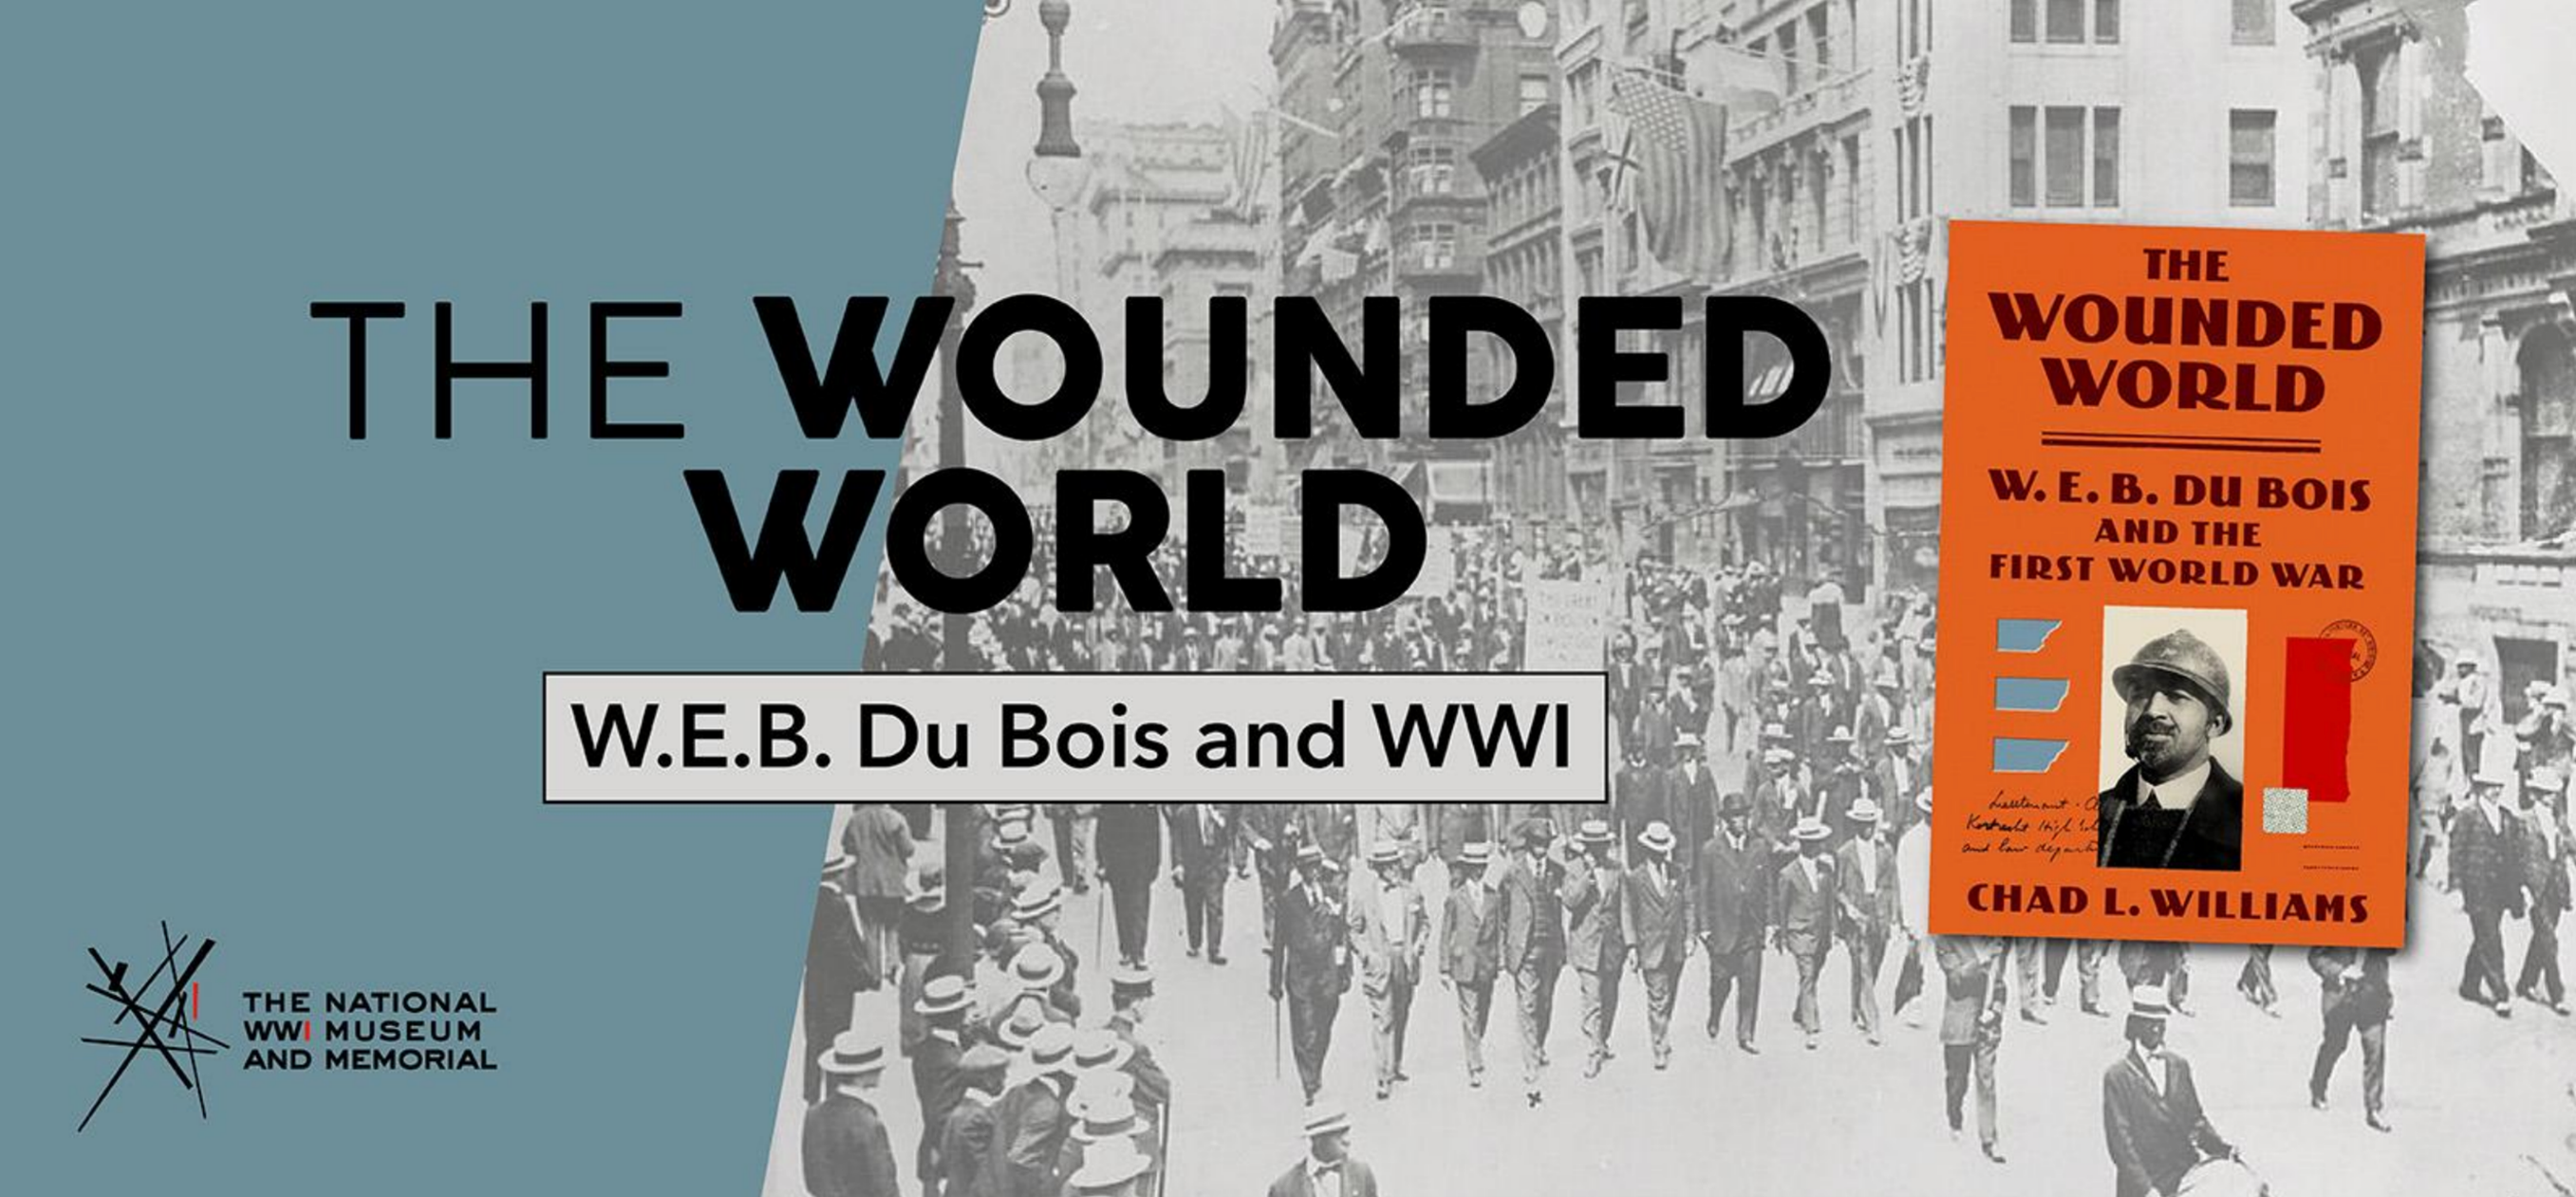 The Wounded World: W.E.B. Du Bois & WWI